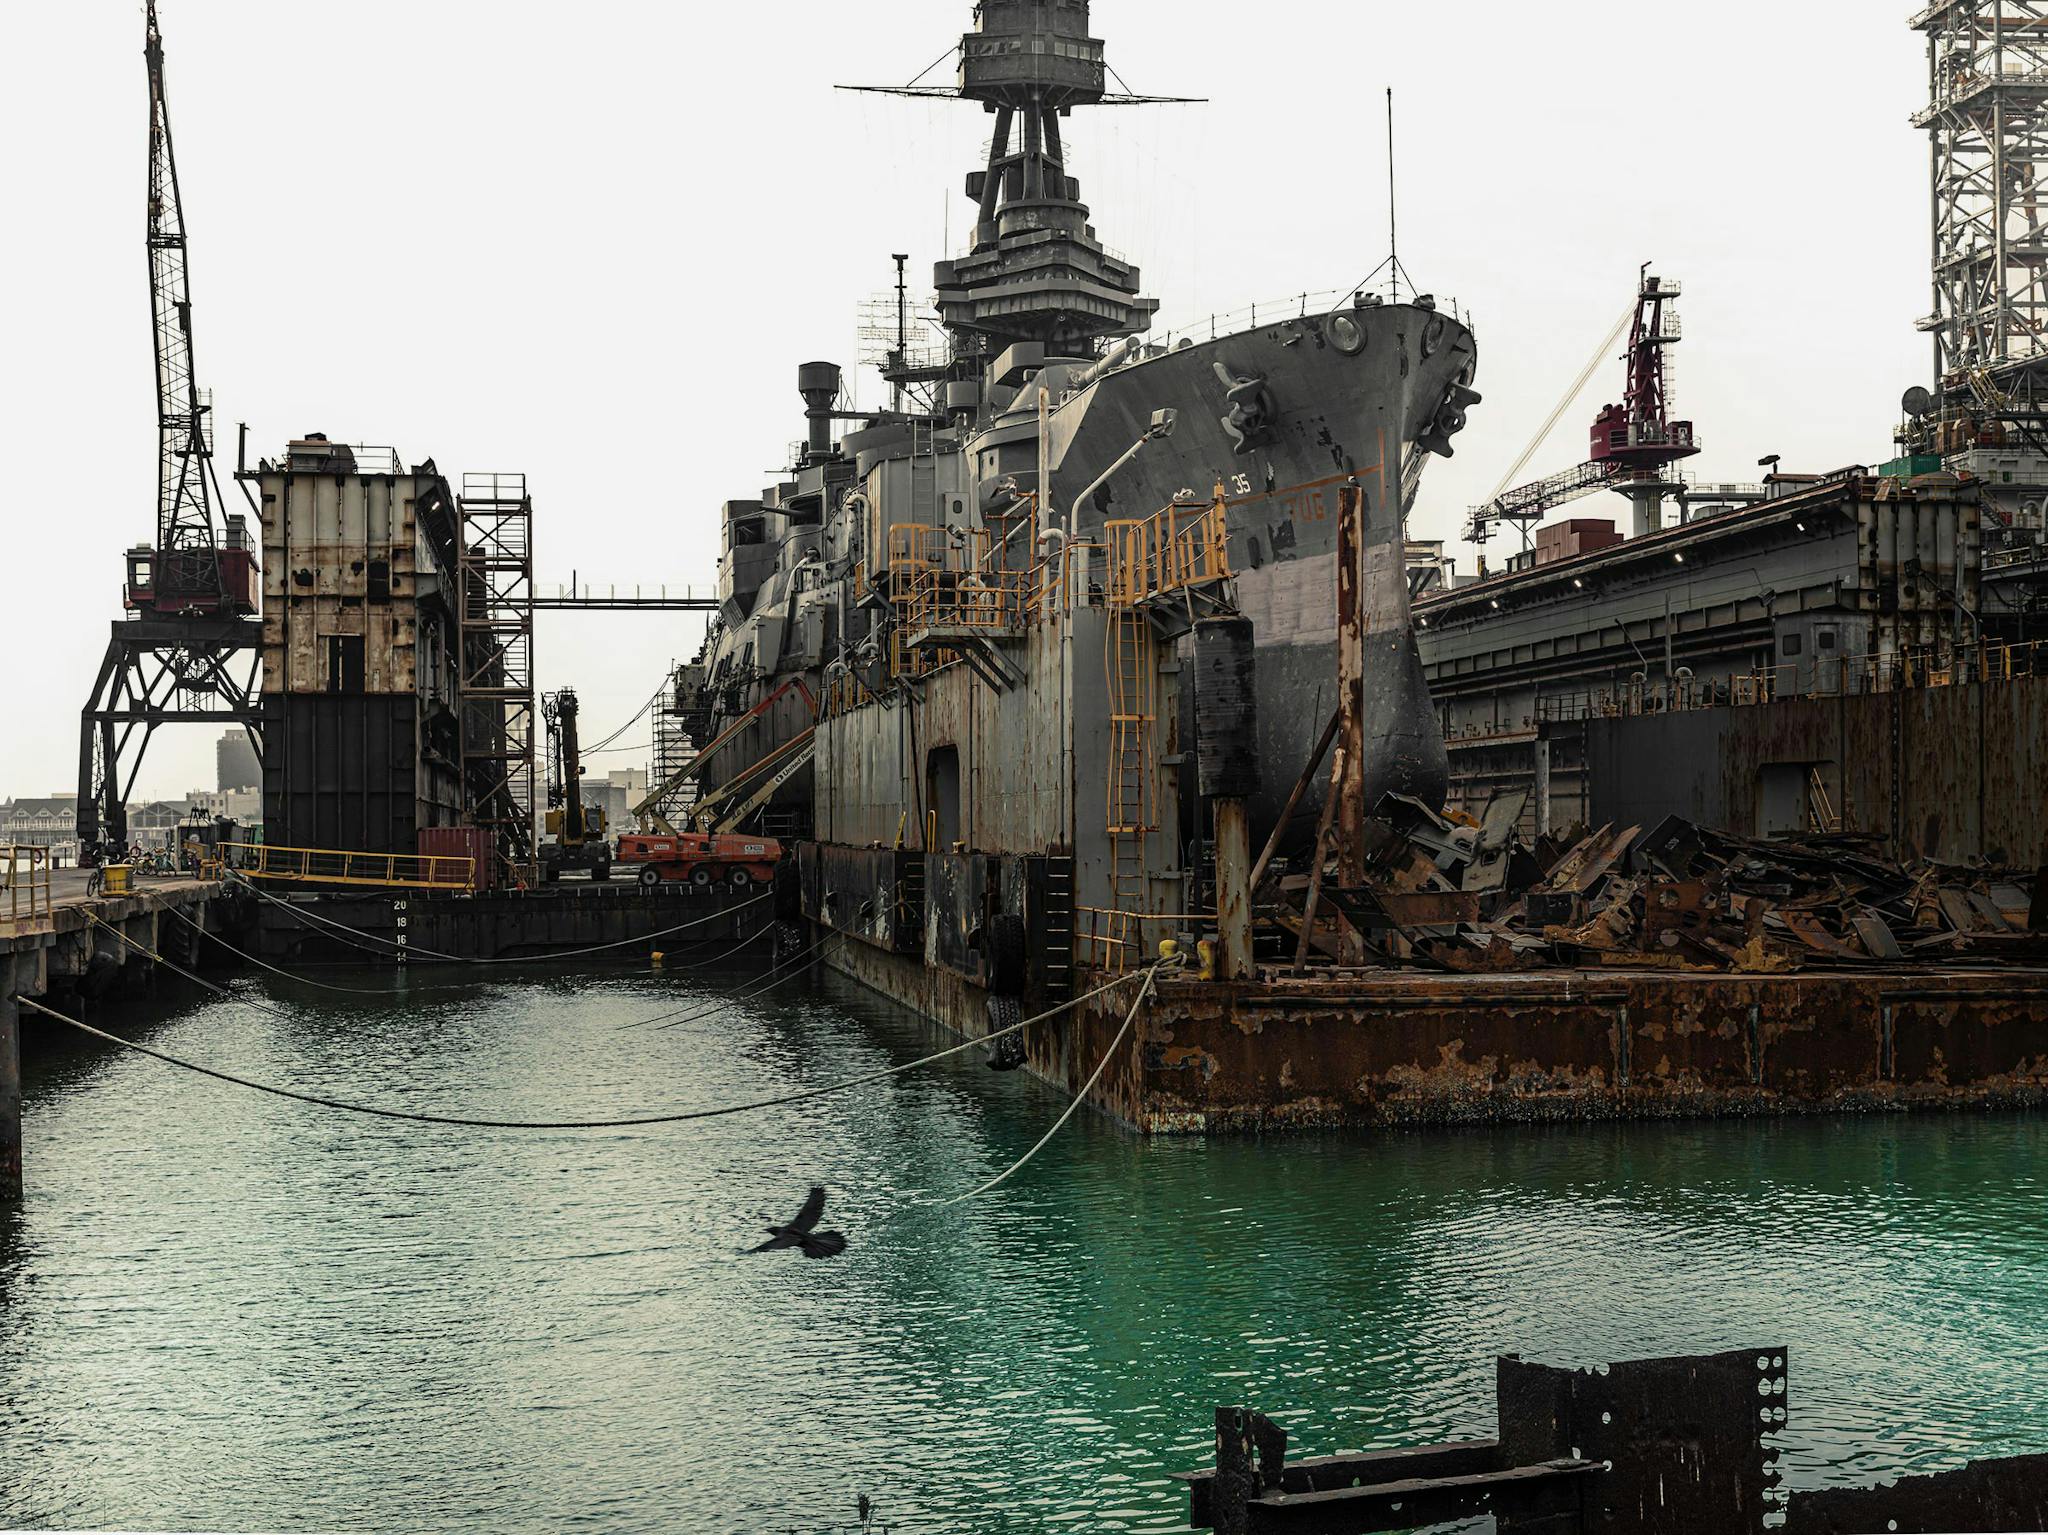 A salvaged dry dock was brought to Gulf Copper and retrofitted for the Texas. It took eight hours to hoist the ship onto the blocks so workers could begin hull repairs.